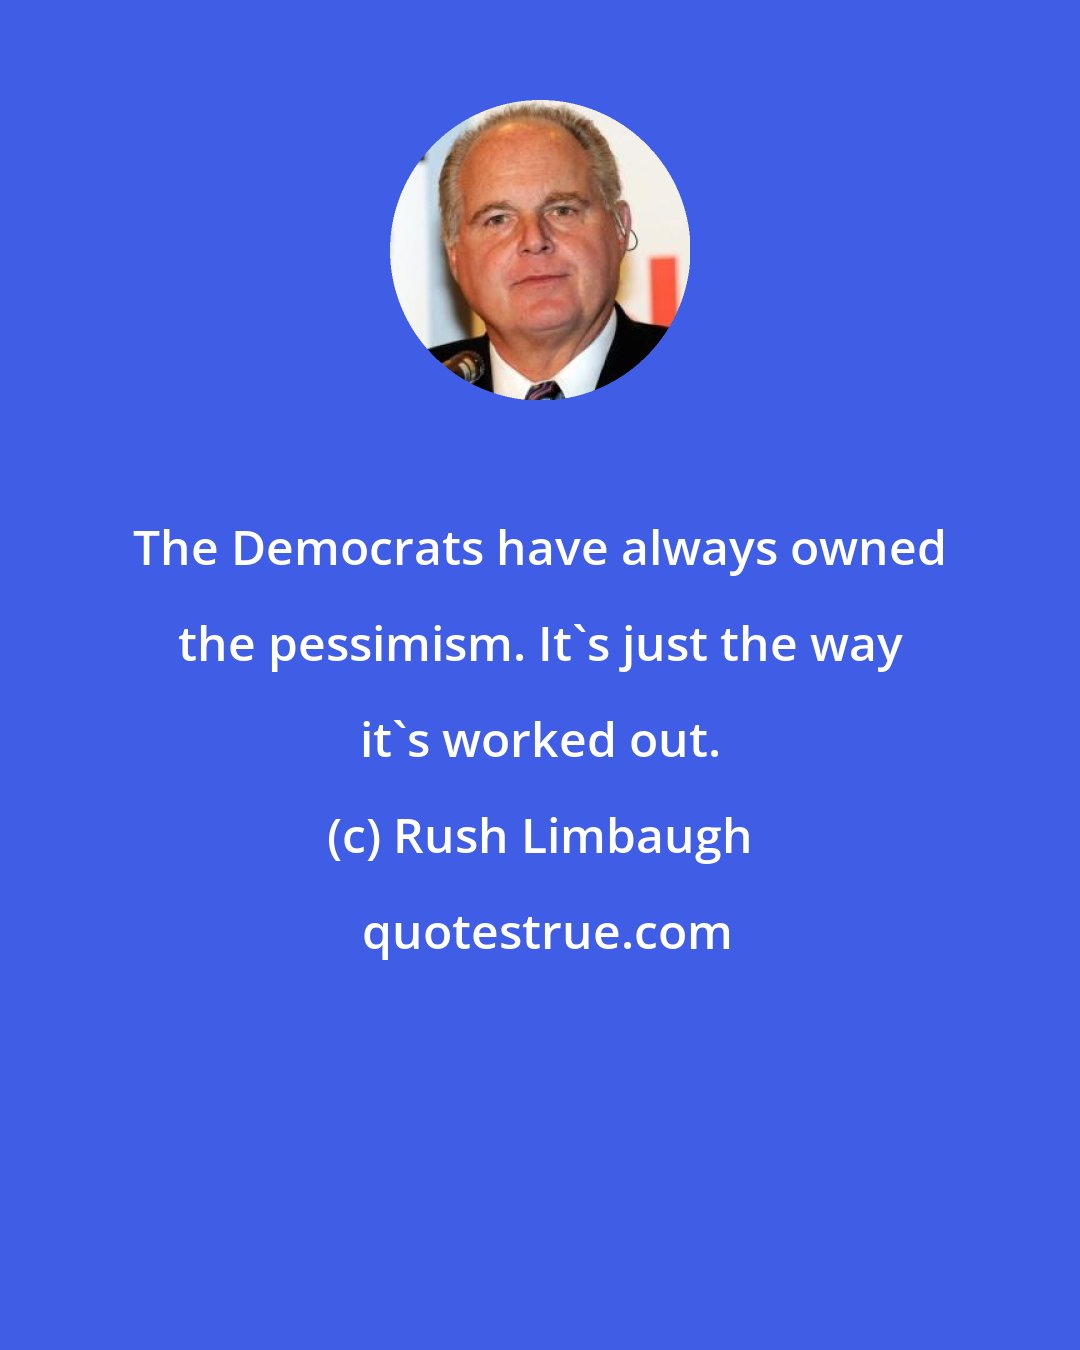 Rush Limbaugh: The Democrats have always owned the pessimism. It's just the way it's worked out.